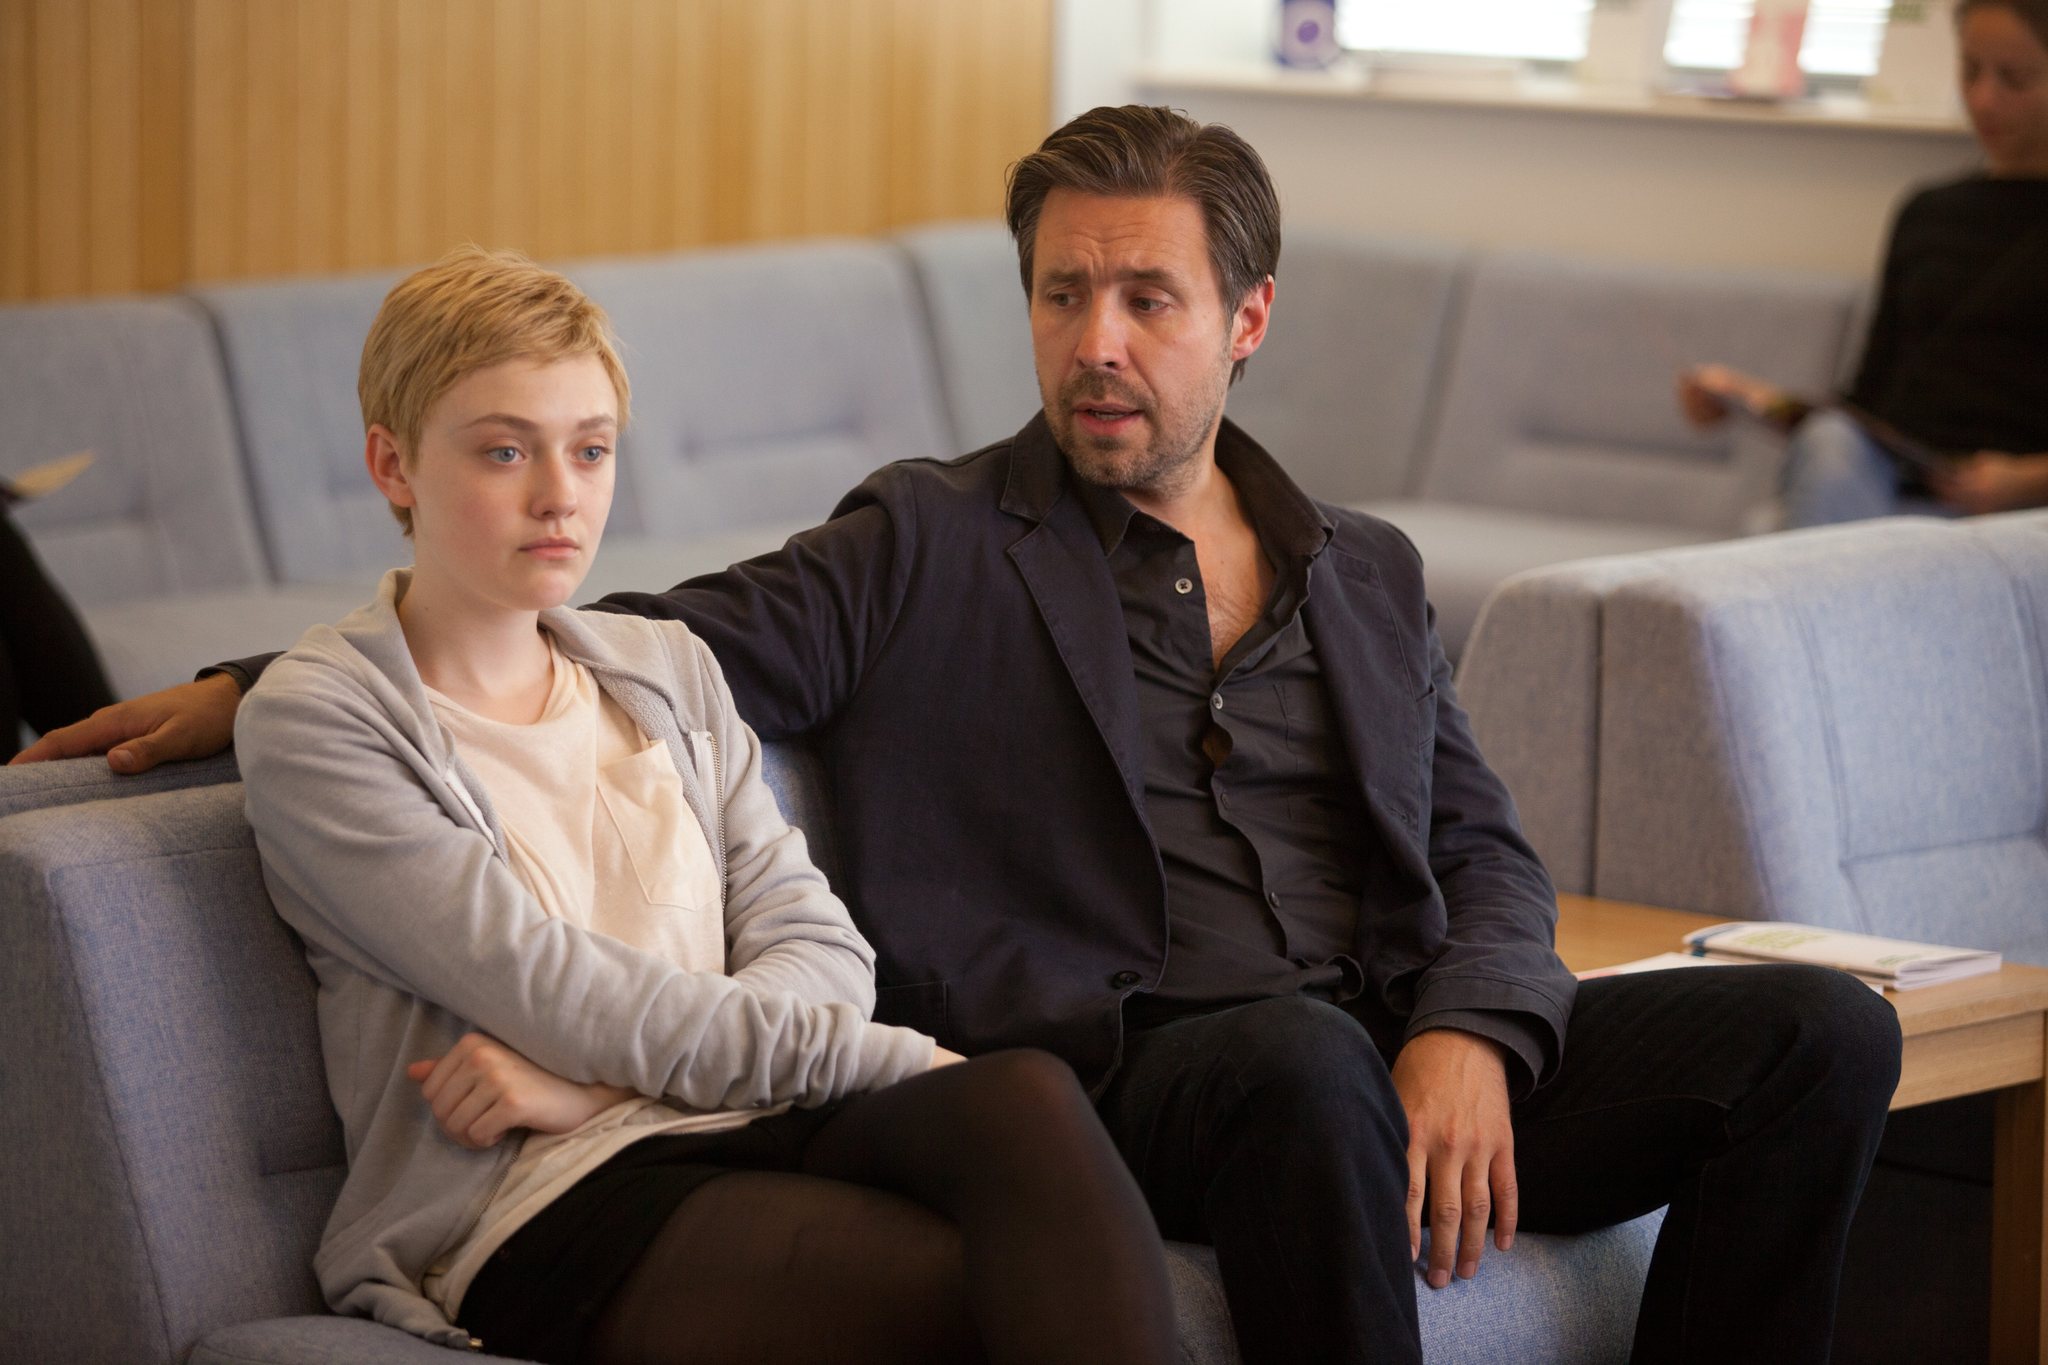 Still of Paddy Considine and Dakota Fanning in Now Is Good (2012)